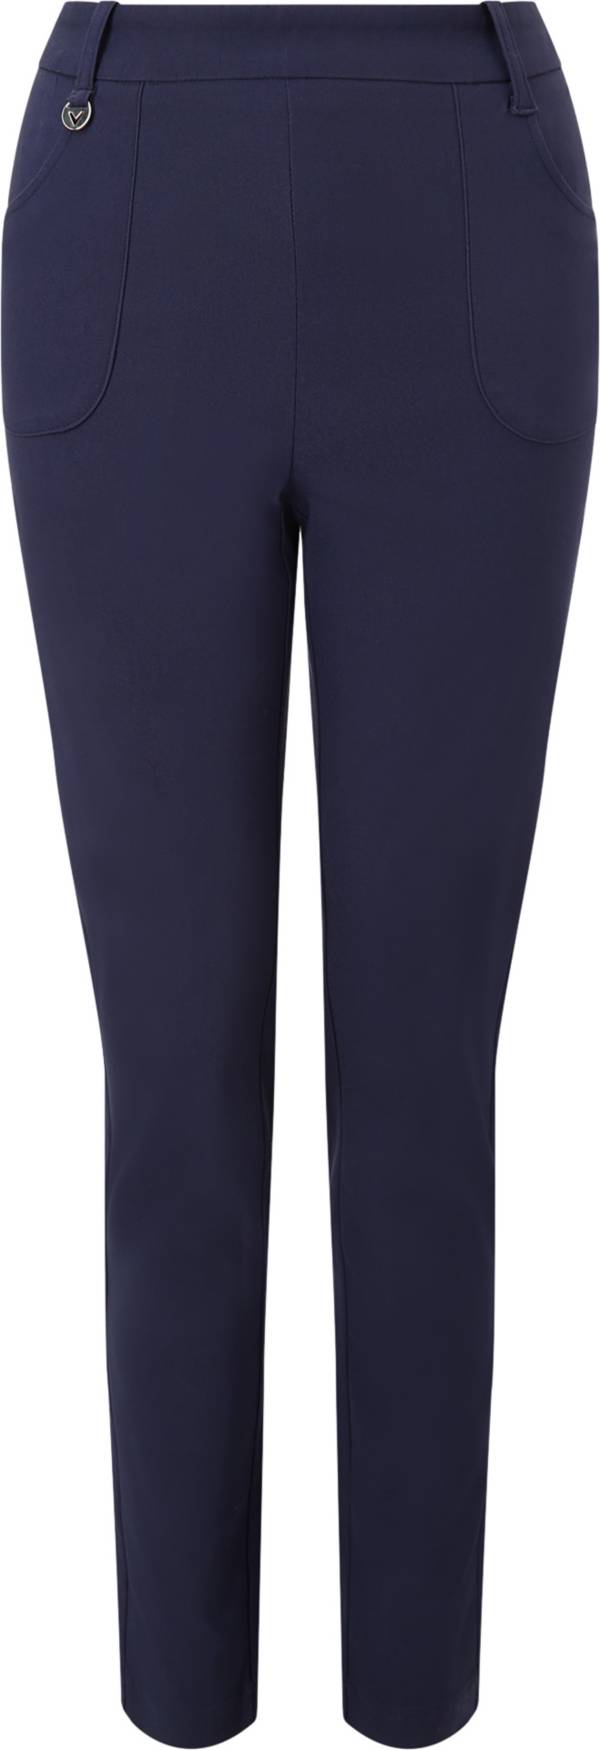 Callaway Women's Tech Stretch Solid Golf Pants - Extended Sizes product image